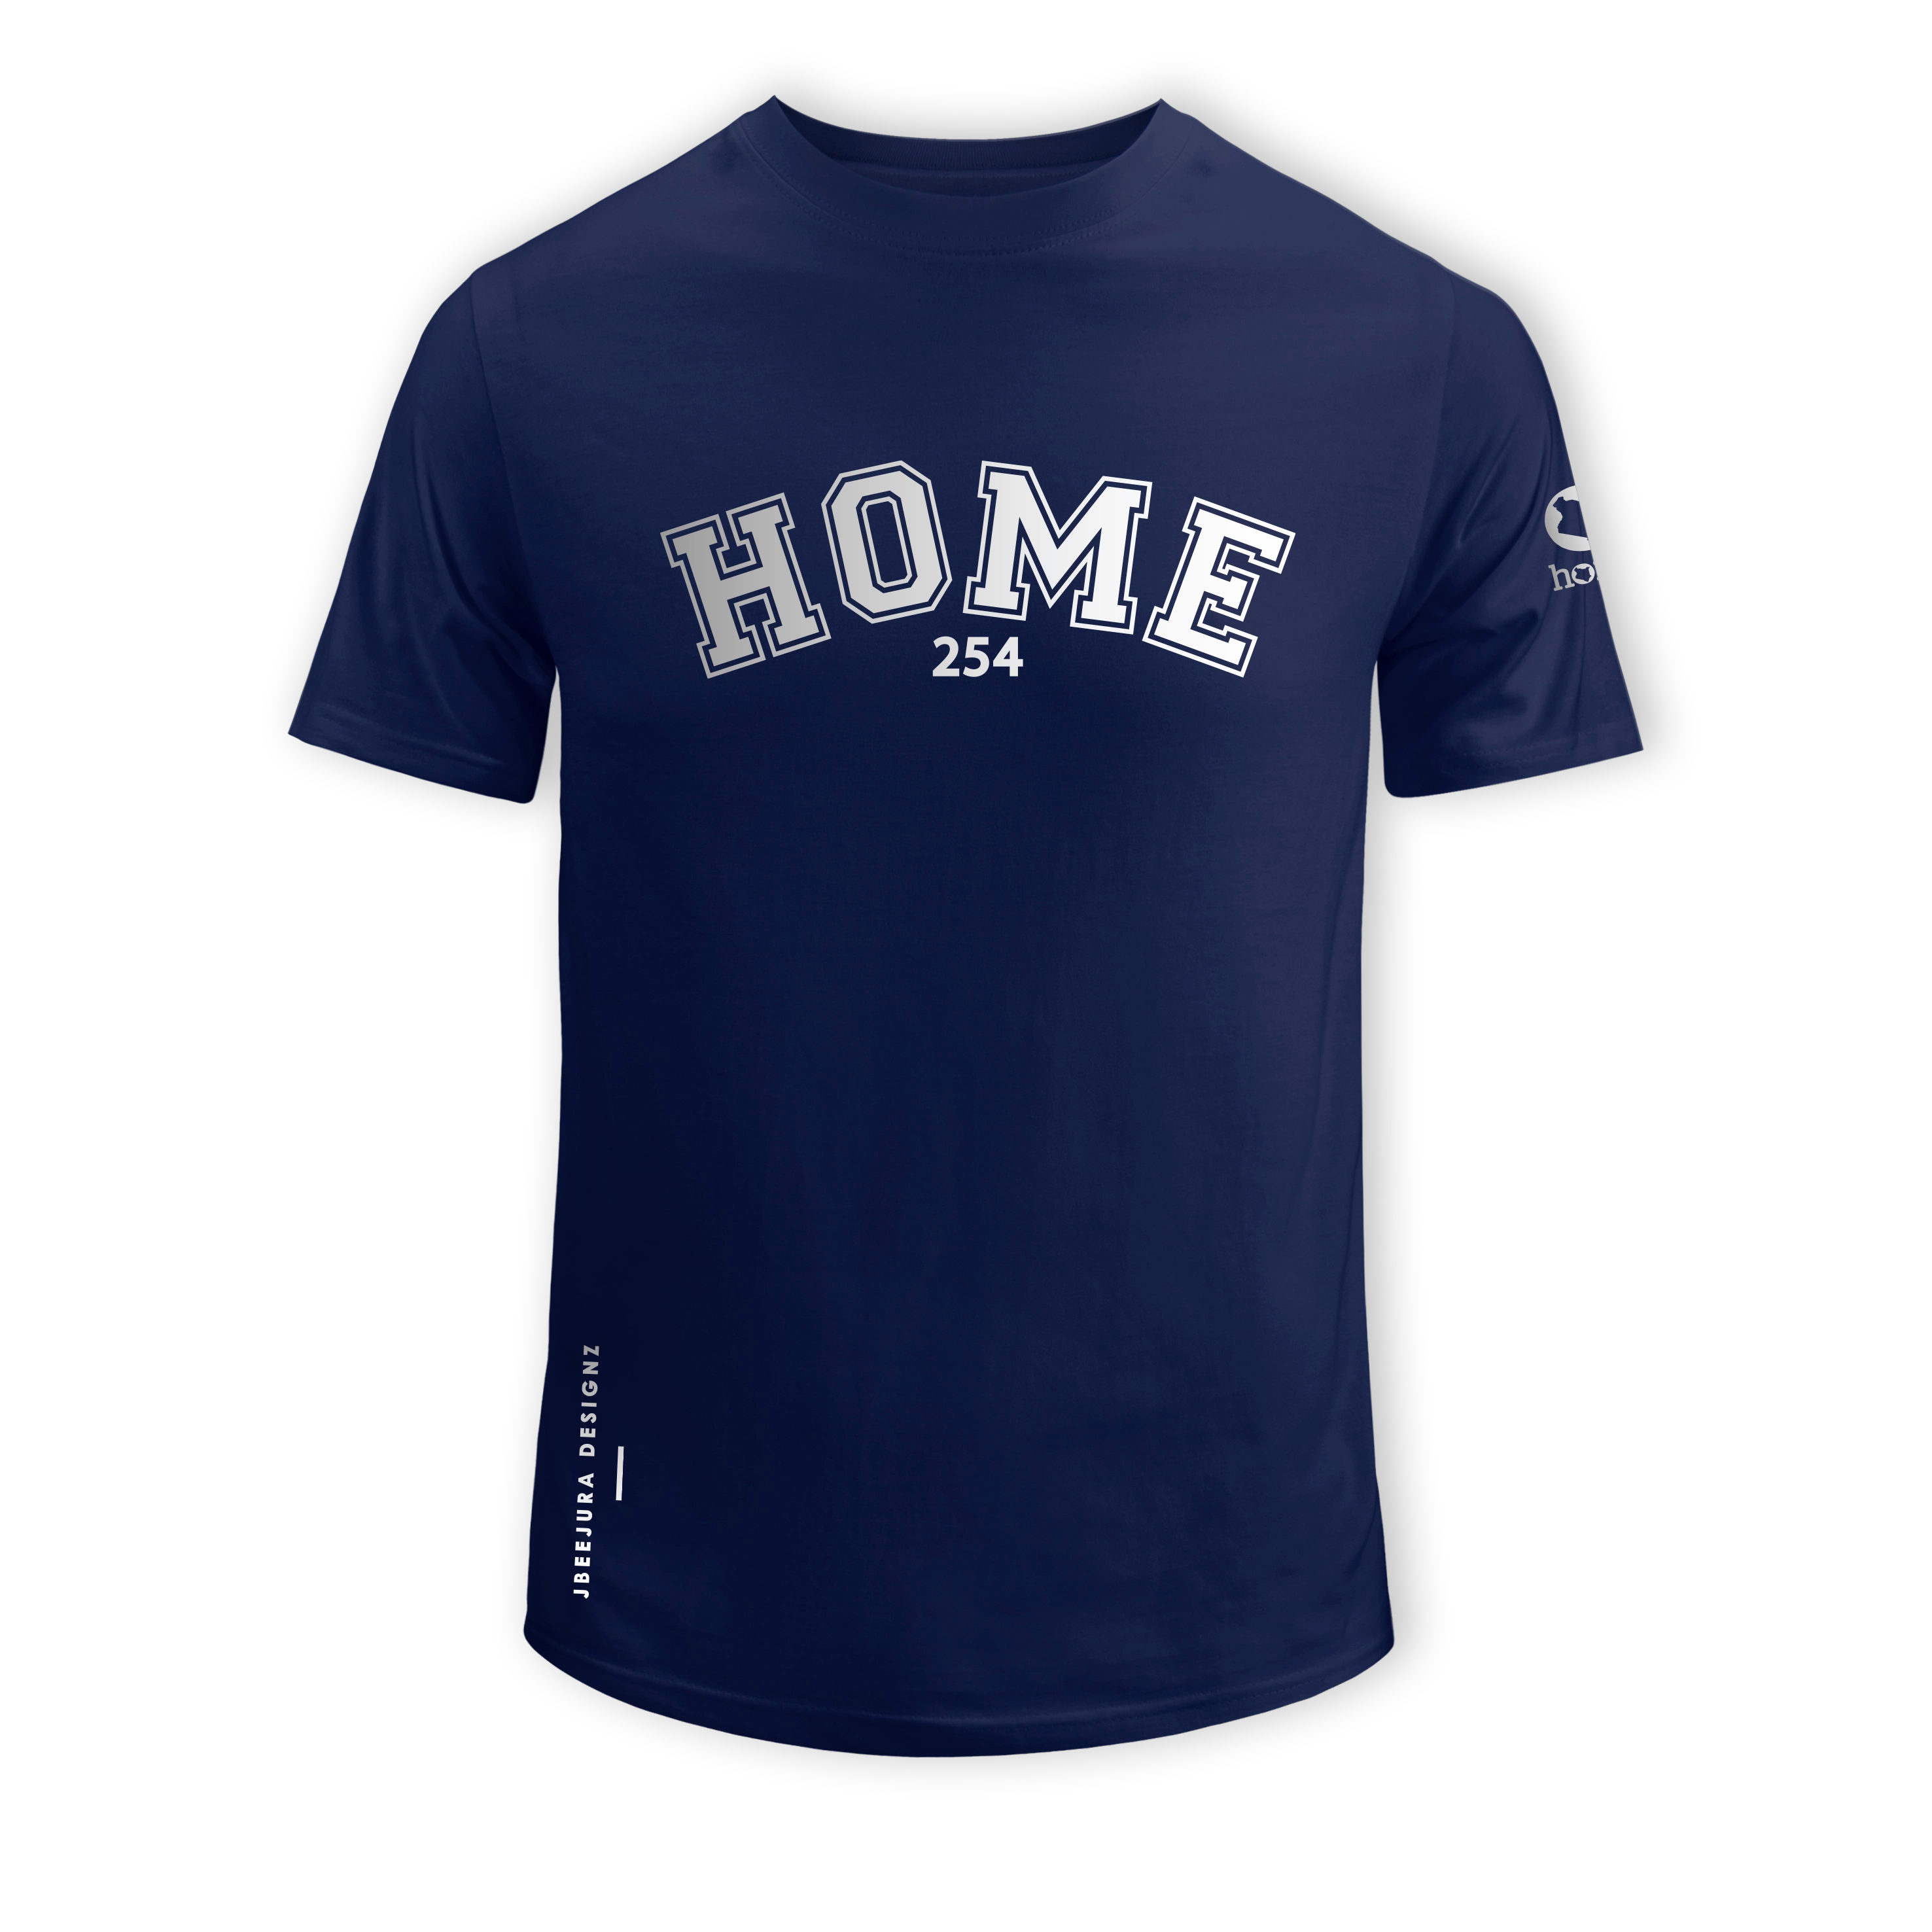 home_254 SHORT-SLEEVED NAVY BLUE T-SHIRT WITH A SILVER COLLEGE PRINT – COTTON PLUS FABRIC